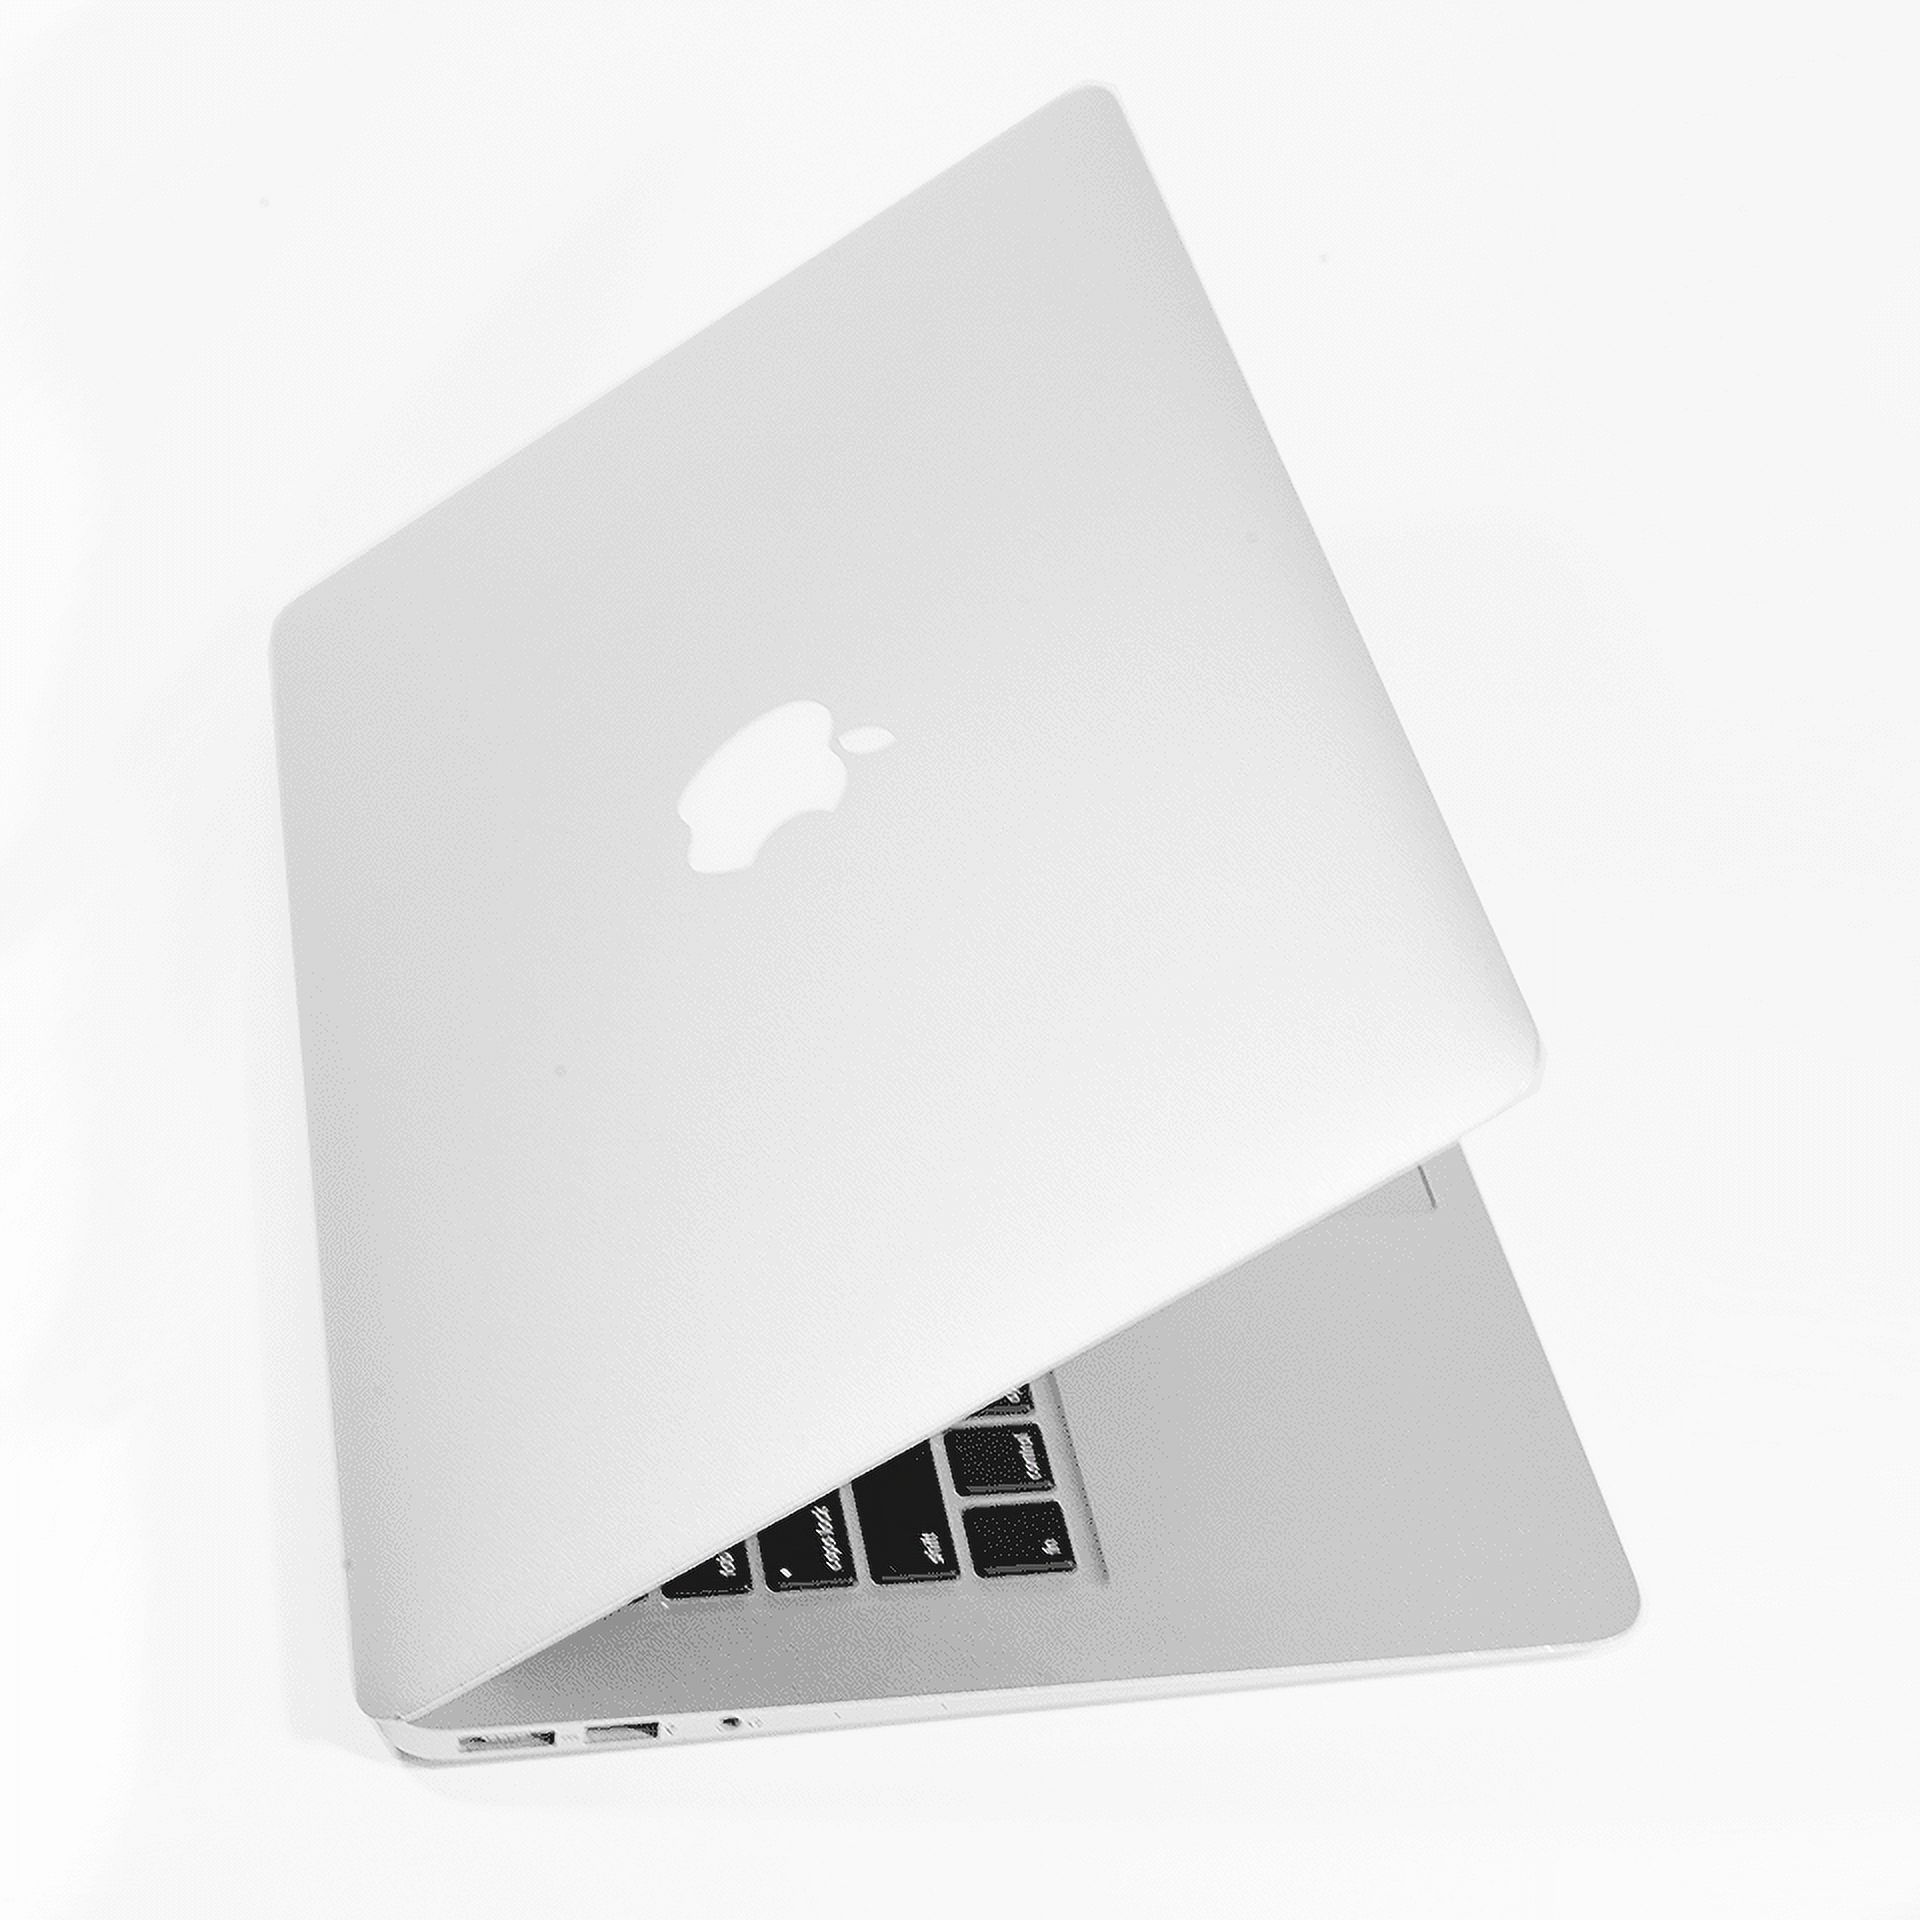 Used 13" Apple MacBook Air 1.7GHz Dual Core i7 8GB Memory / 256GB SSD (Turbo Boost to 3.3GHz) () - image 1 of 7